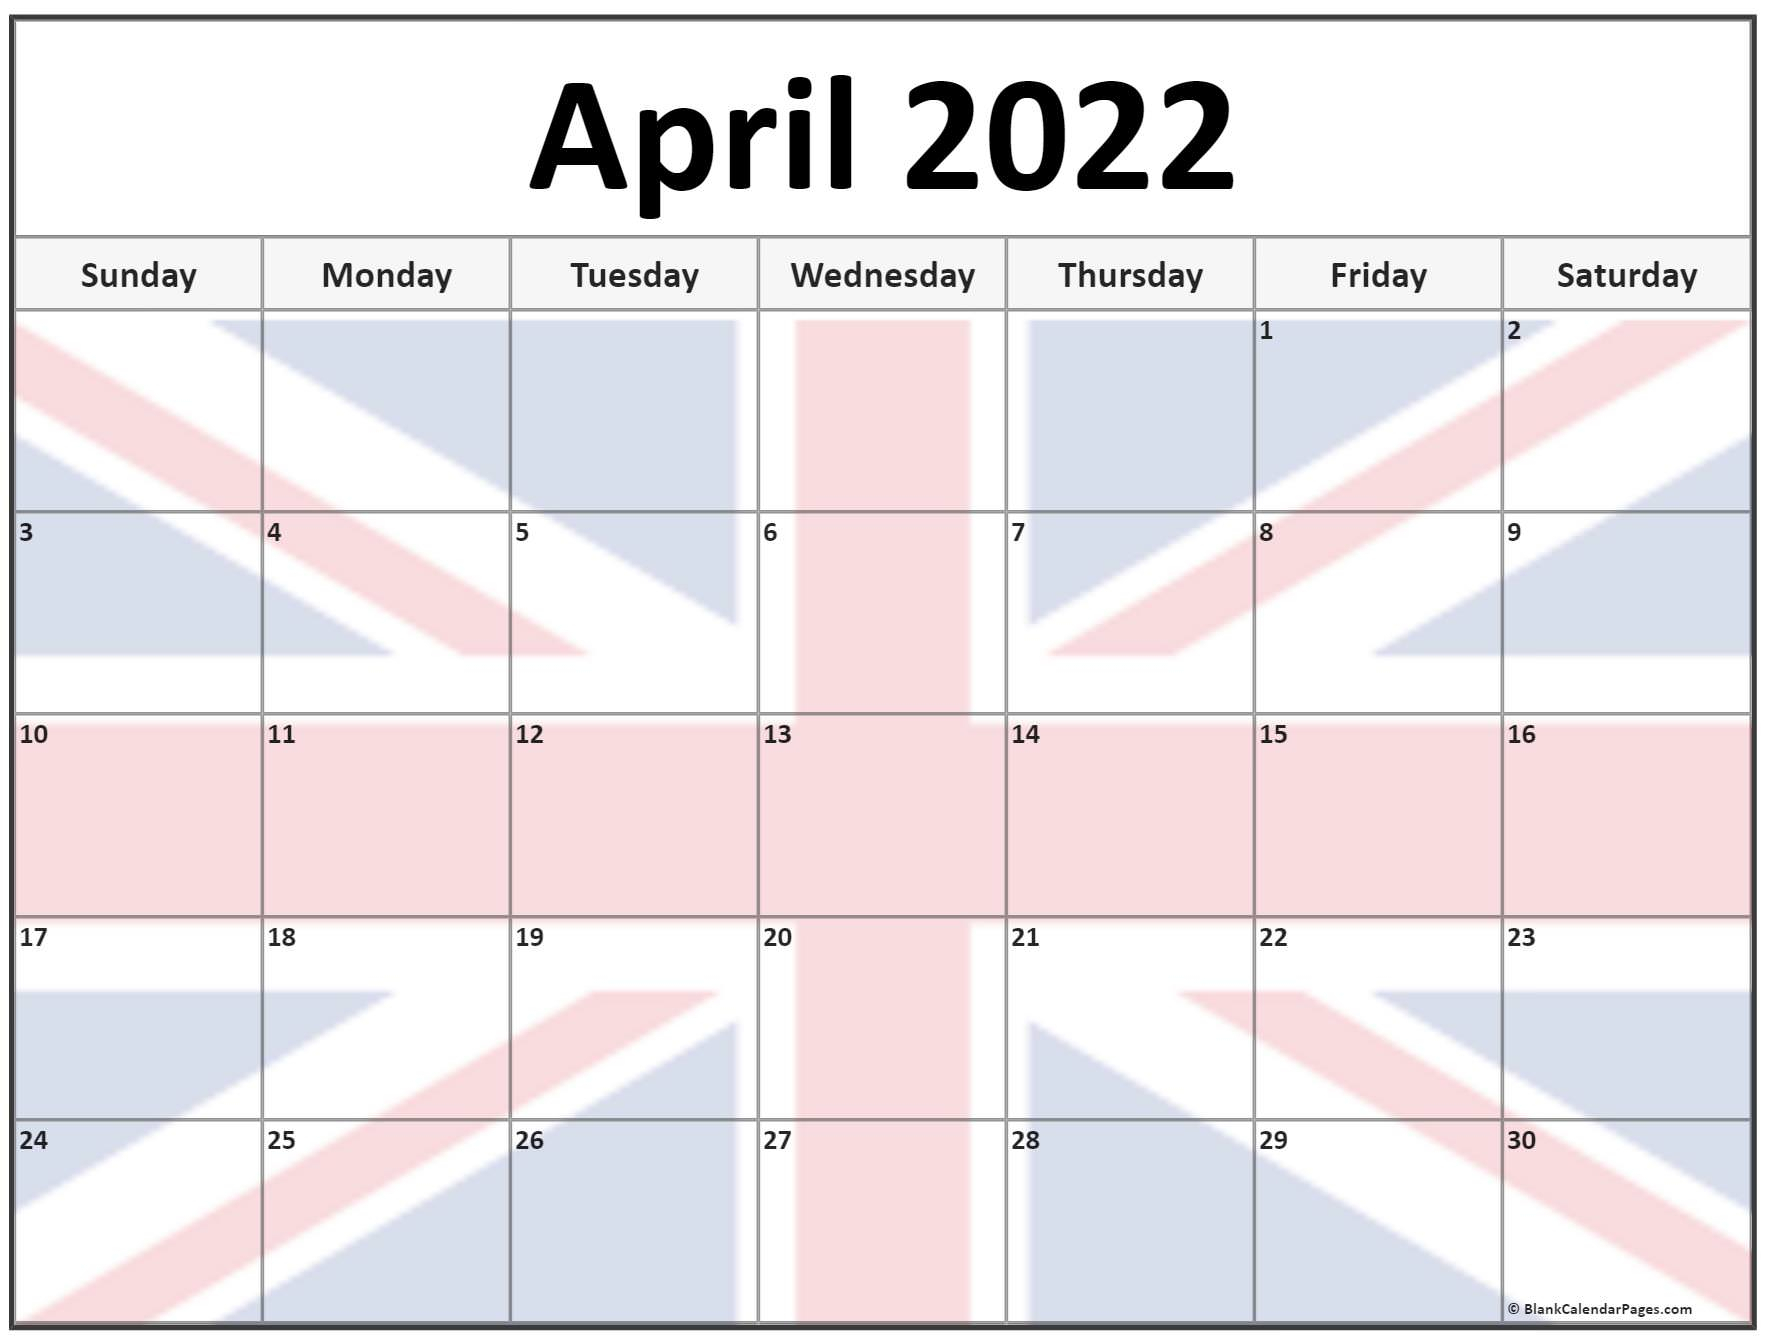 Collection Of April 2022 Photo Calendars With Image Filters.